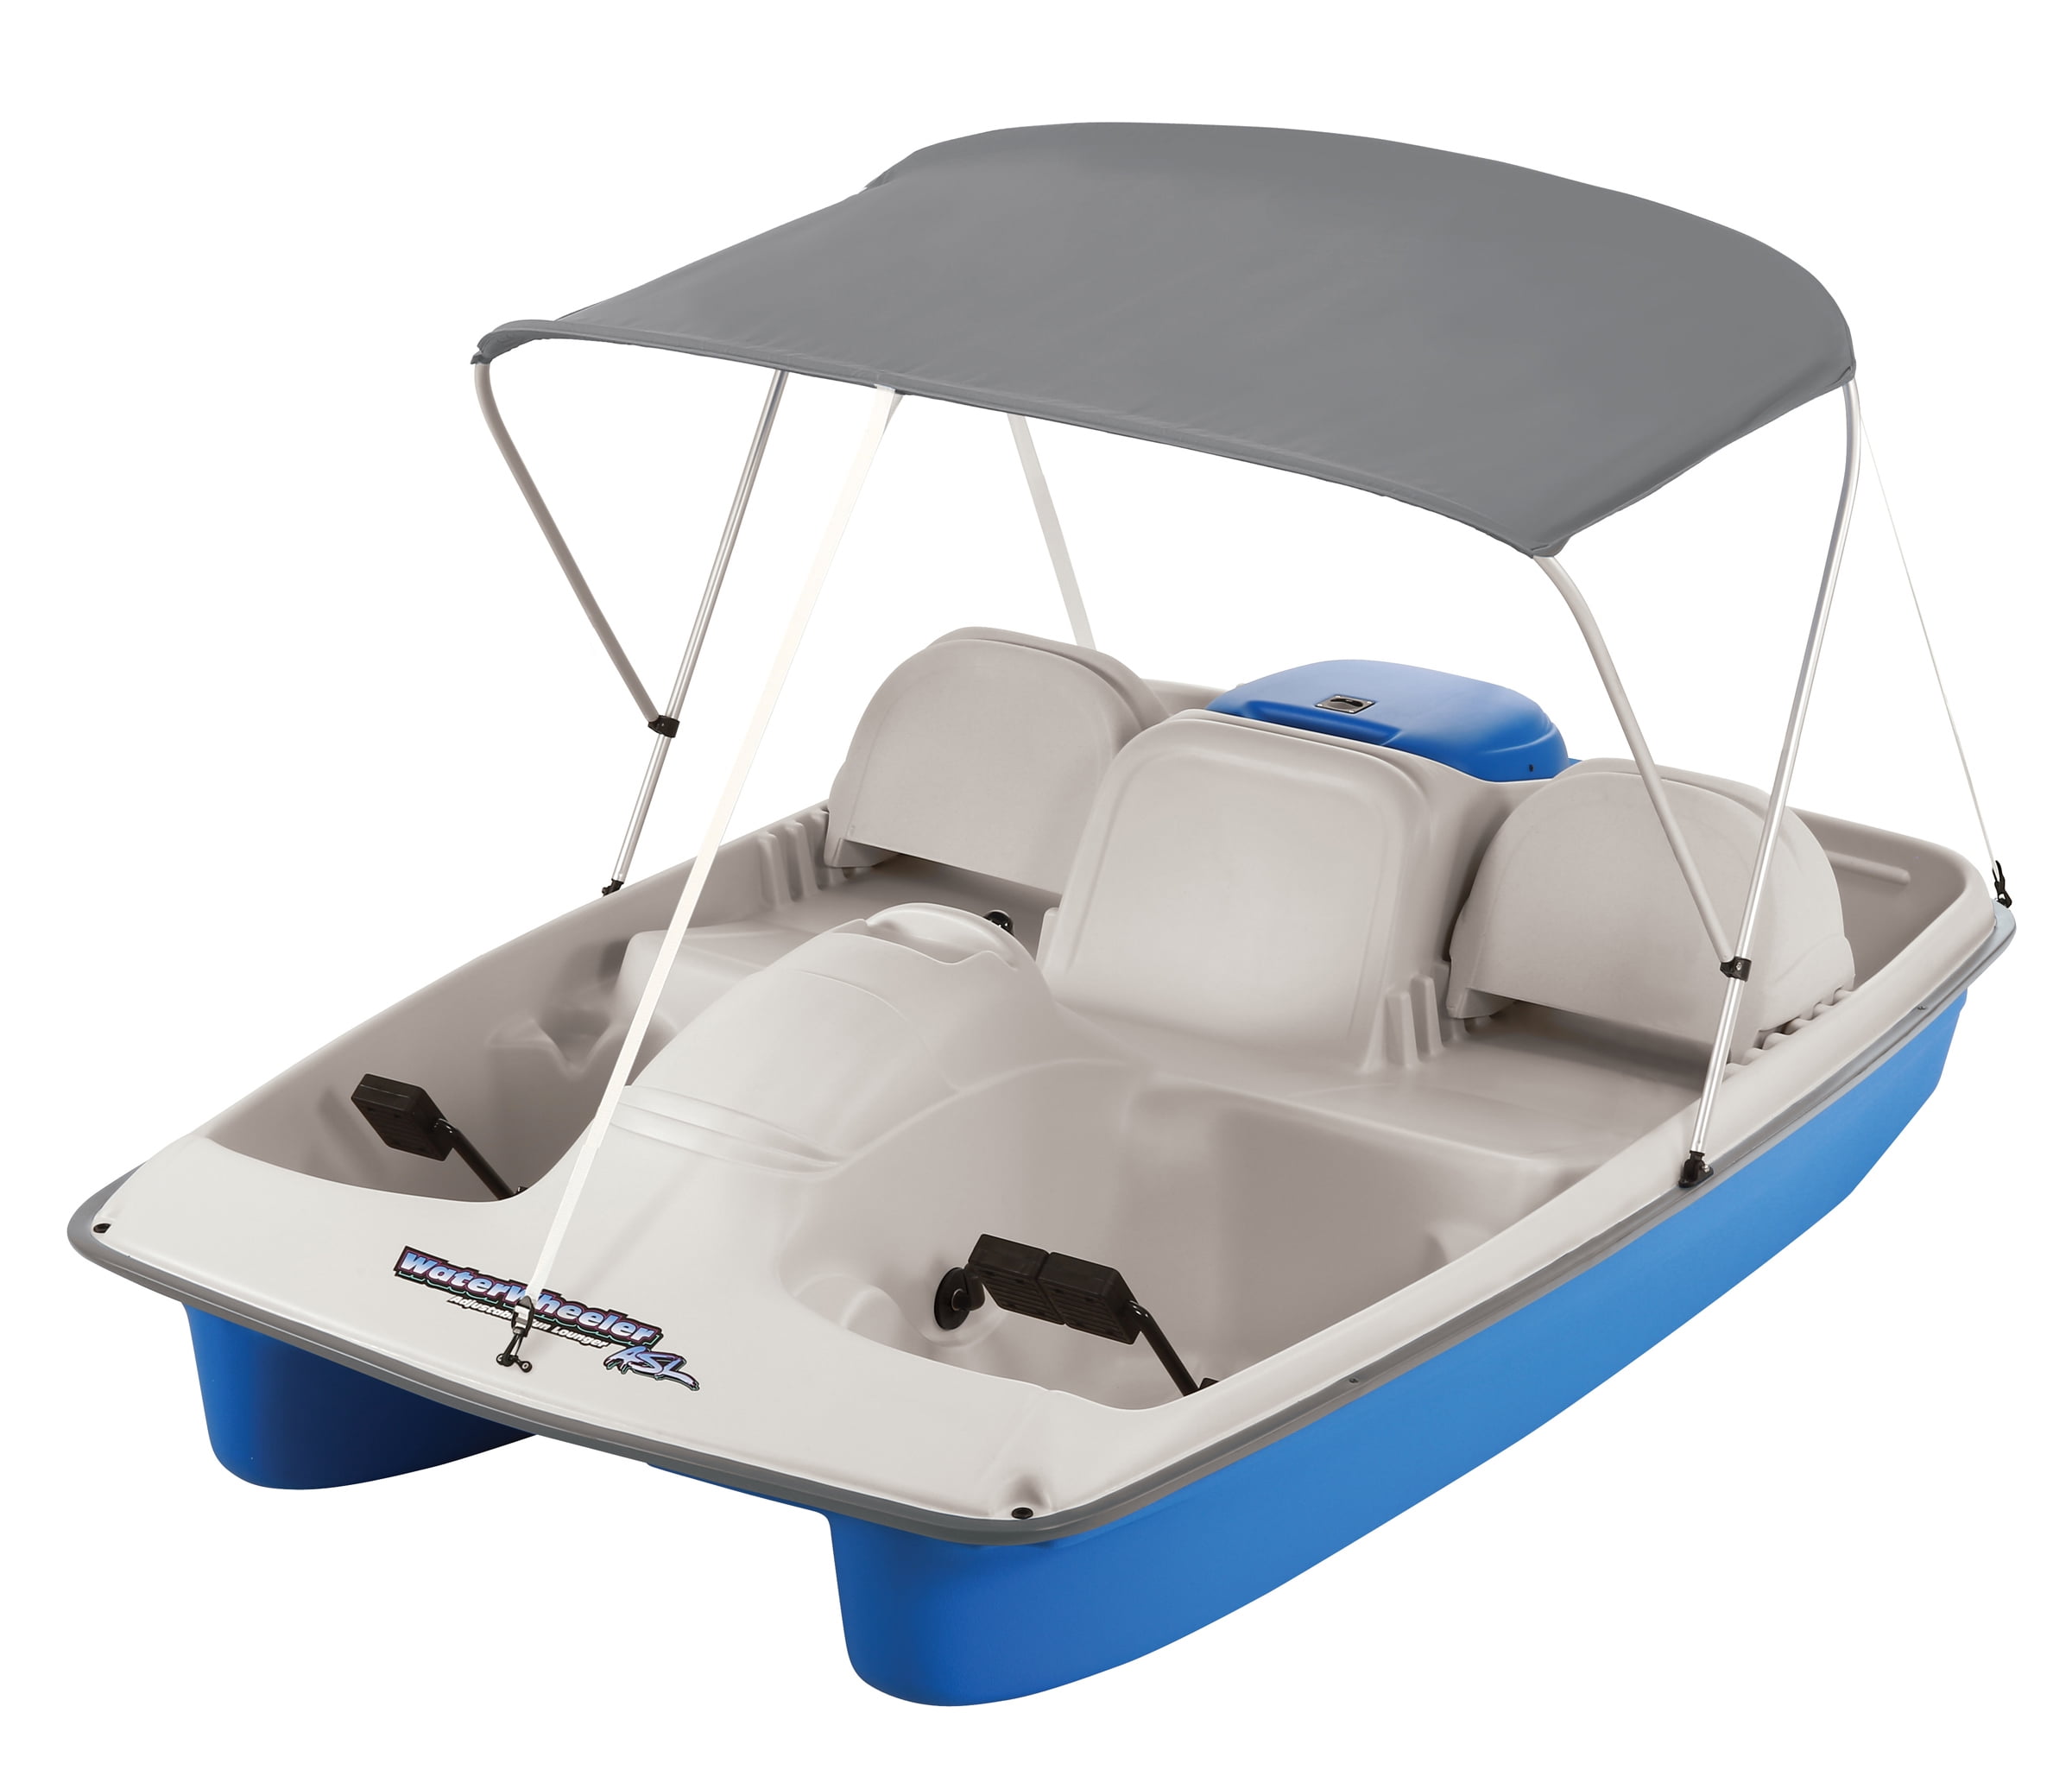 Water Wheeler ASL Electric Pedal Boat with Canopy, Blue